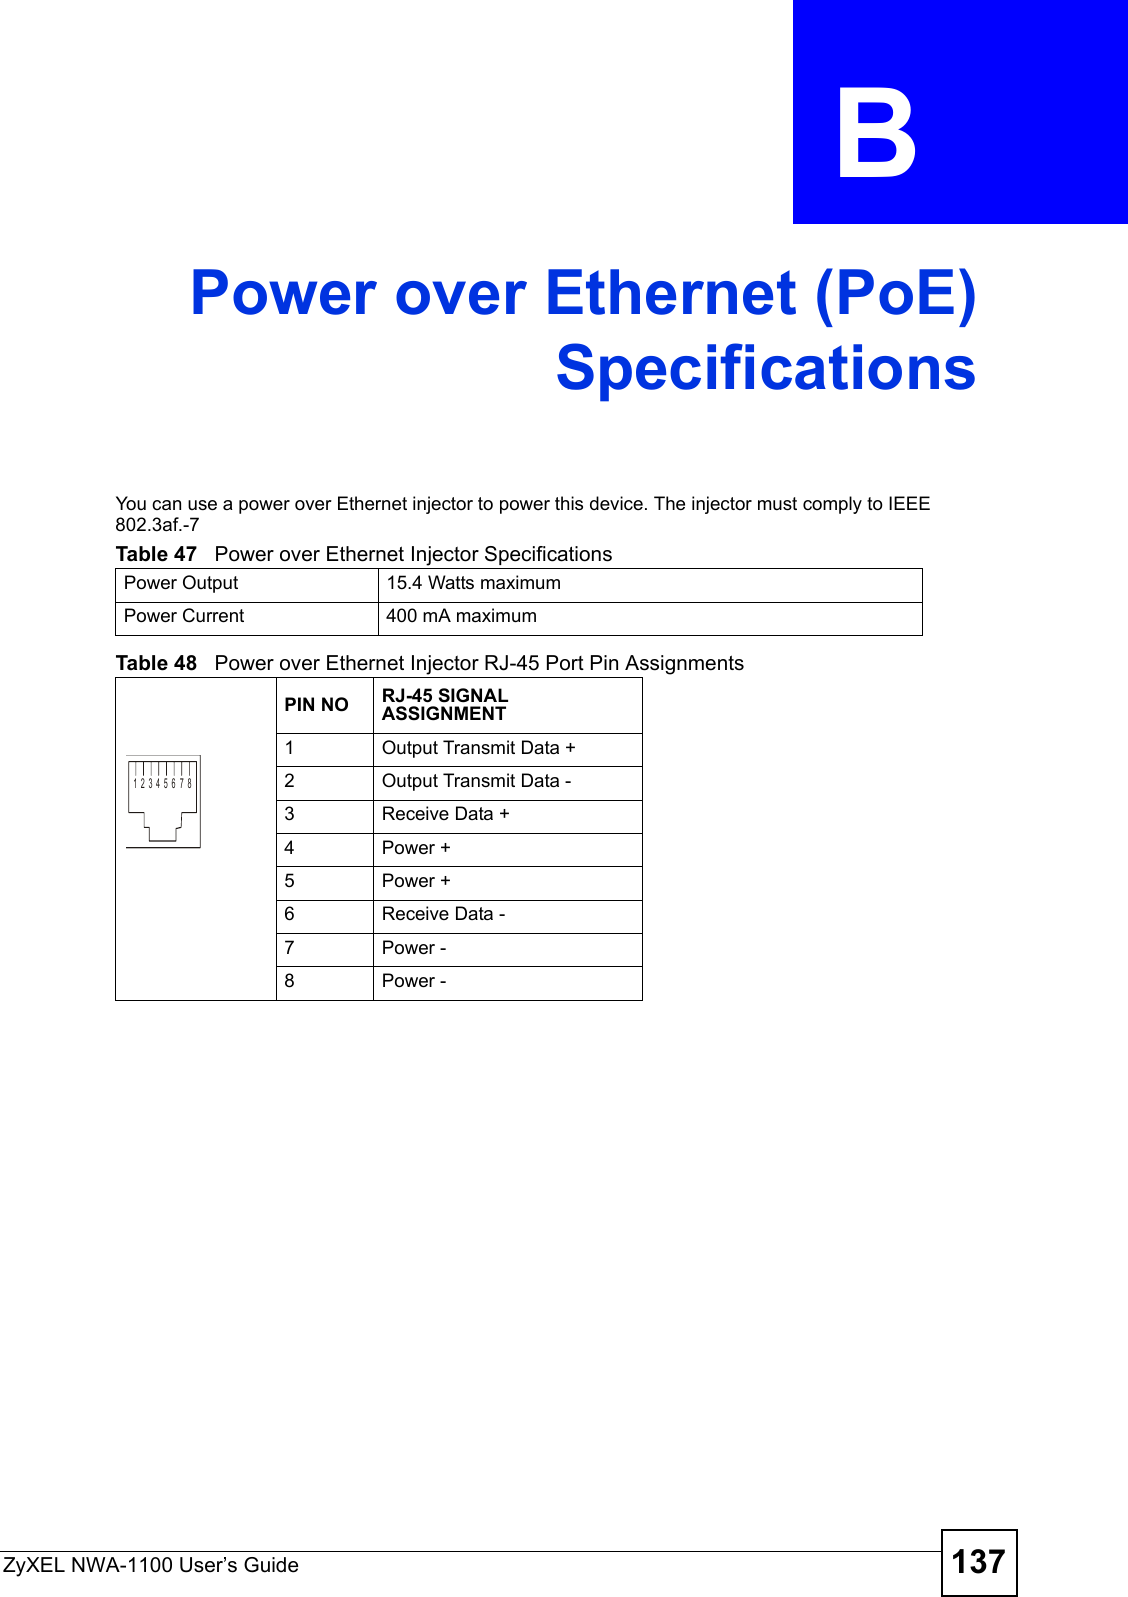 ZyXEL NWA-1100 User’s Guide 137APPENDIX  B Power over Ethernet (PoE)SpecificationsYou can use a power over Ethernet injector to power this device. The injector must comply to IEEE 802.3af.-7 Table 47   Power over Ethernet Injector Specifications Power Output 15.4 Watts maximumPower Current 400 mA maximumTable 48   Power over Ethernet Injector RJ-45 Port Pin AssignmentsPIN NO RJ-45 SIGNAL ASSIGNMENT1Output Transmit Data +2Output Transmit Data -3Receive Data +4Power +5Power +6Receive Data -7Power -8Power -12345678